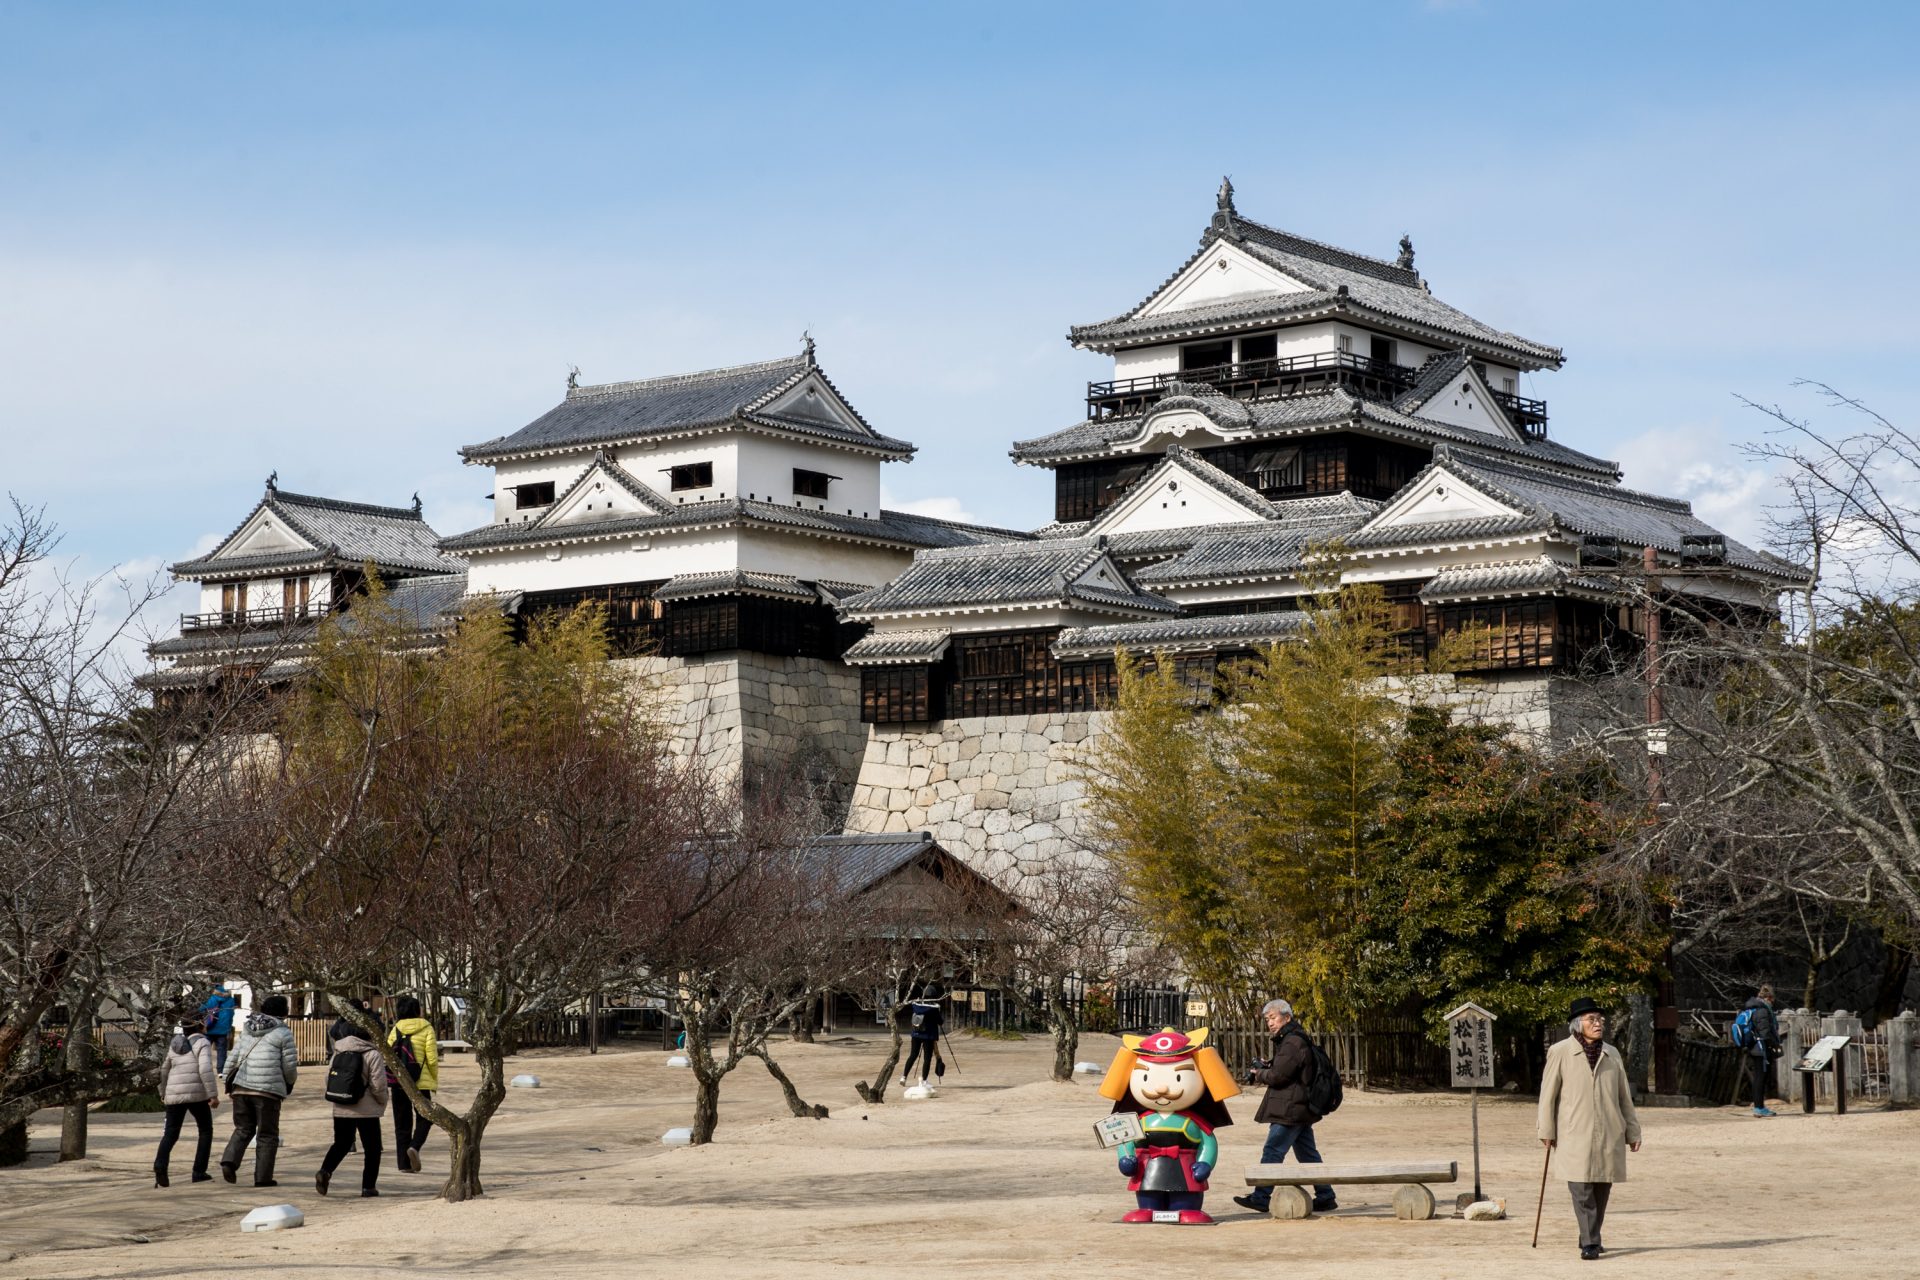 <p>Currently, there are only 12 castle towers in Japan built before the Edo period (17th through mid-19th century) and they are designated as important cultural properties of the country. The best highlight is the view from the top floor of the castle tower. It is also famous as a cherry blossom viewing spot.</p>